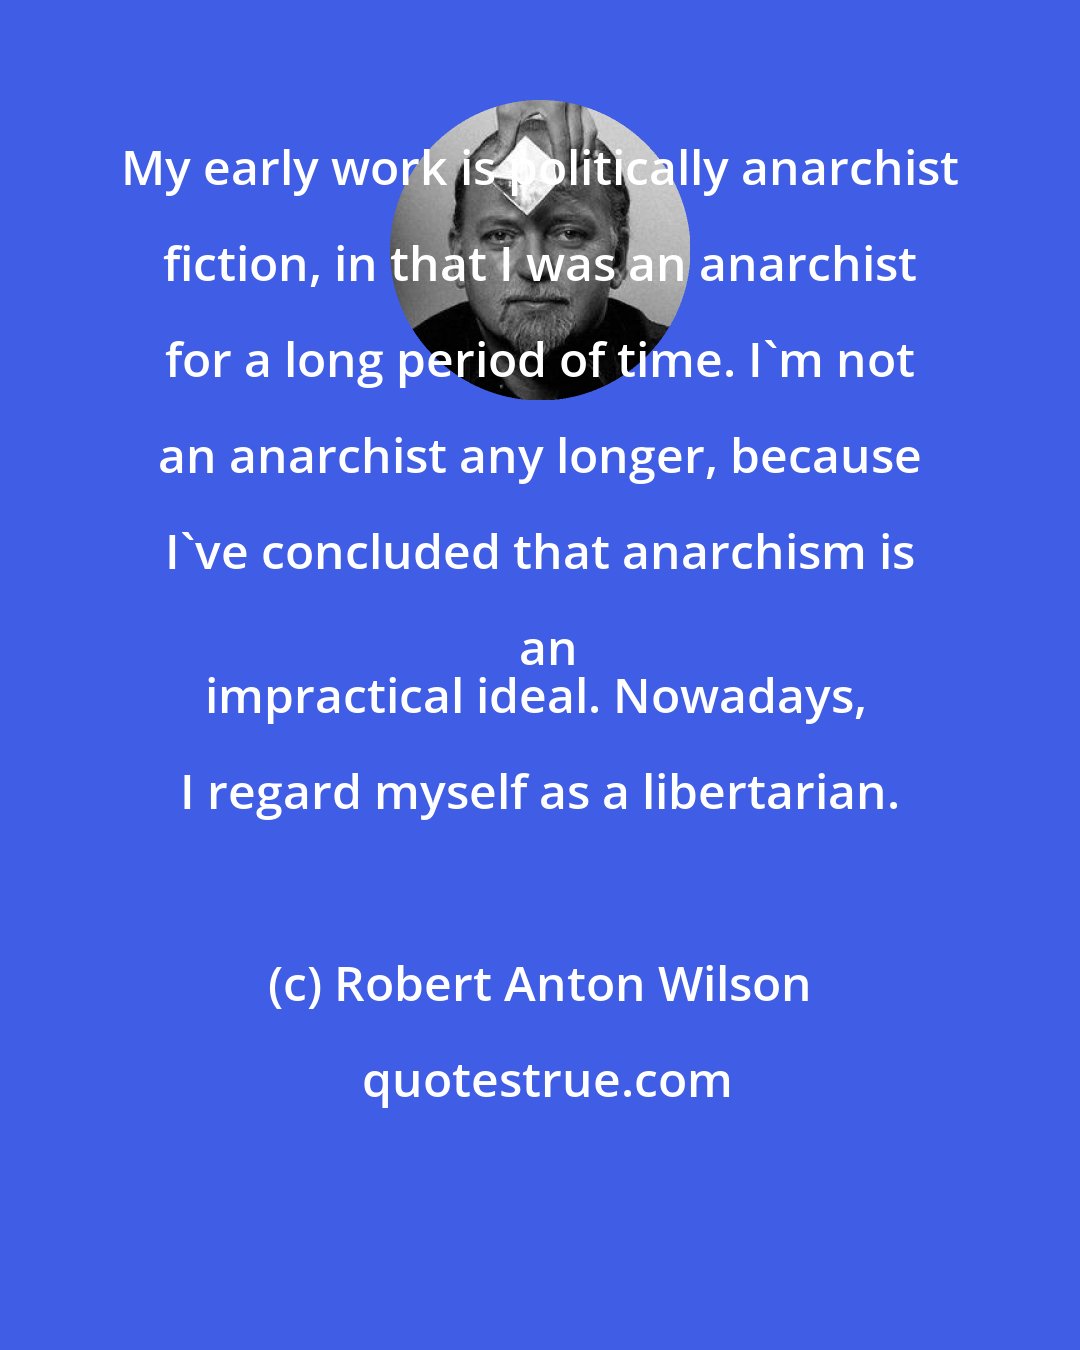 Robert Anton Wilson: My early work is politically anarchist fiction, in that I was an anarchist for a long period of time. I'm not an anarchist any longer, because I've concluded that anarchism is an
impractical ideal. Nowadays, I regard myself as a libertarian.